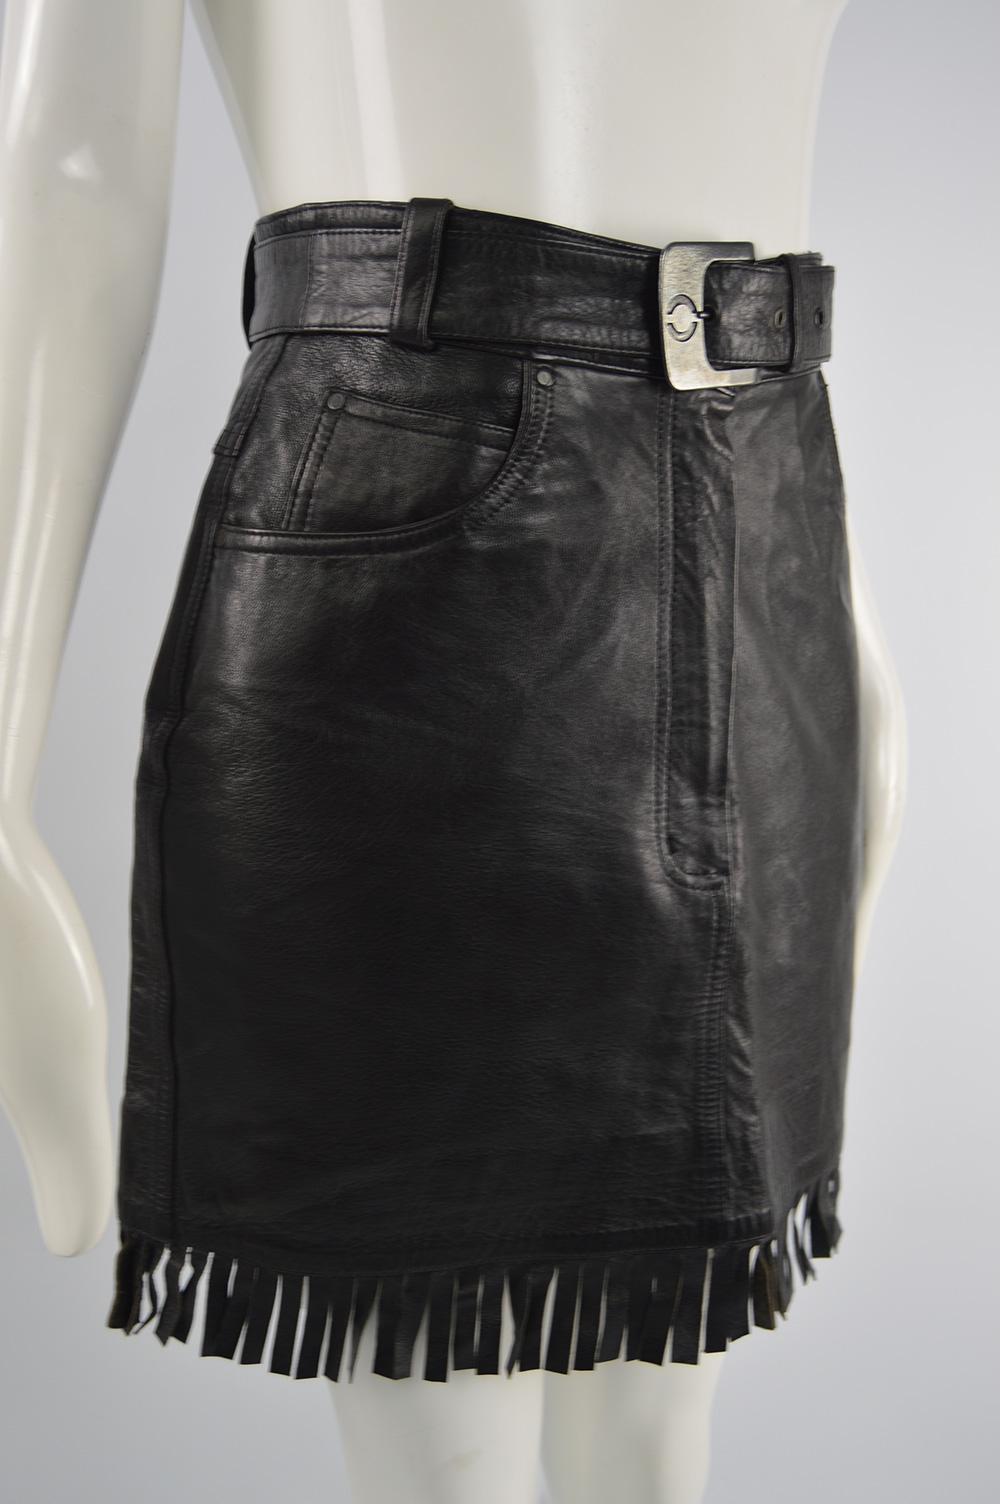 leather skirt 90s outfit